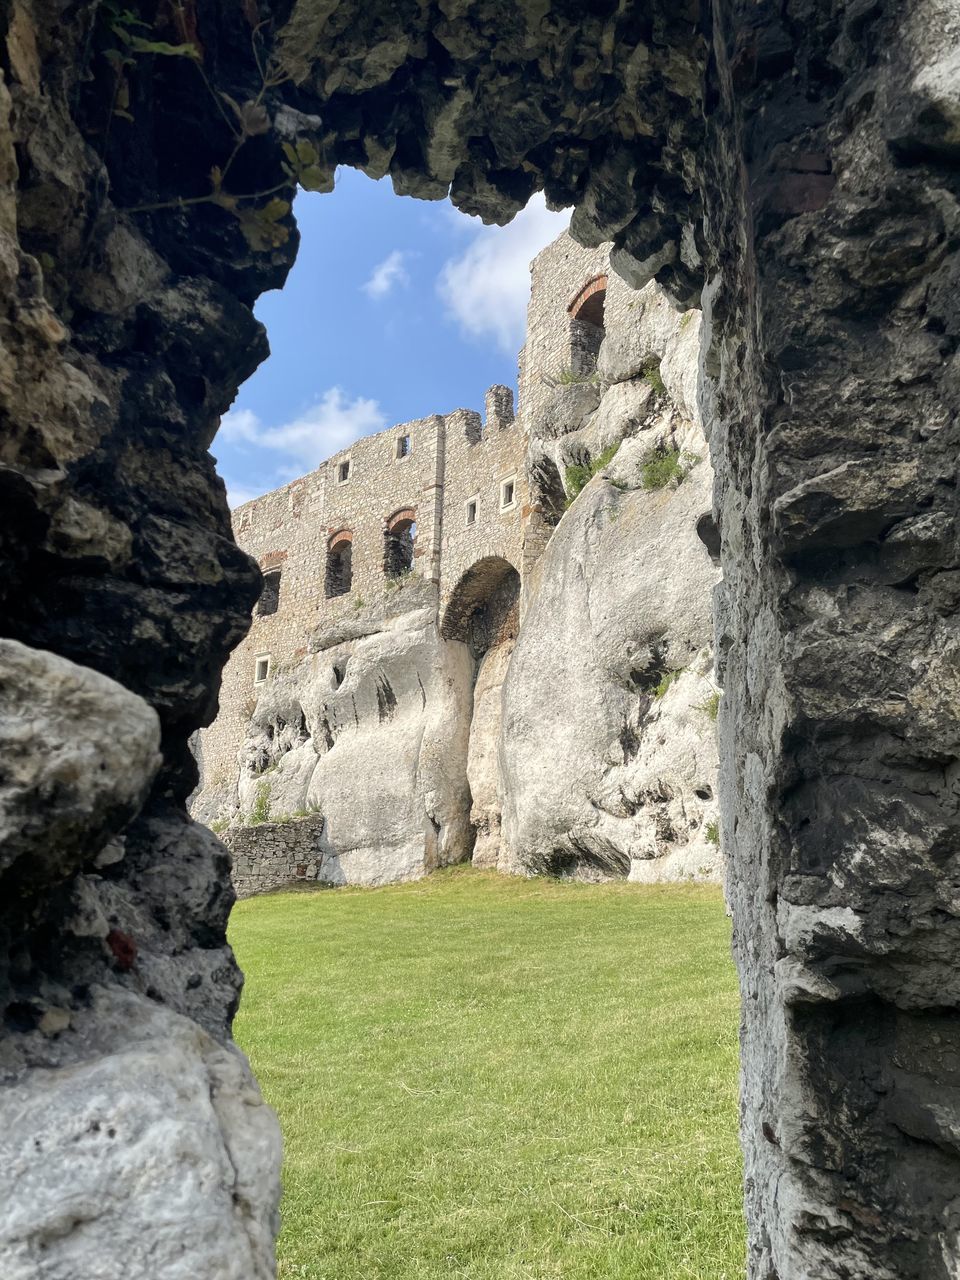 Architecture History The Past Built Structure Ruins Ancient Old Ruin Travel Destinations Nature Rock Grass Arch Building Exterior Travel Day Sky Ancient History No People Tourism Plant